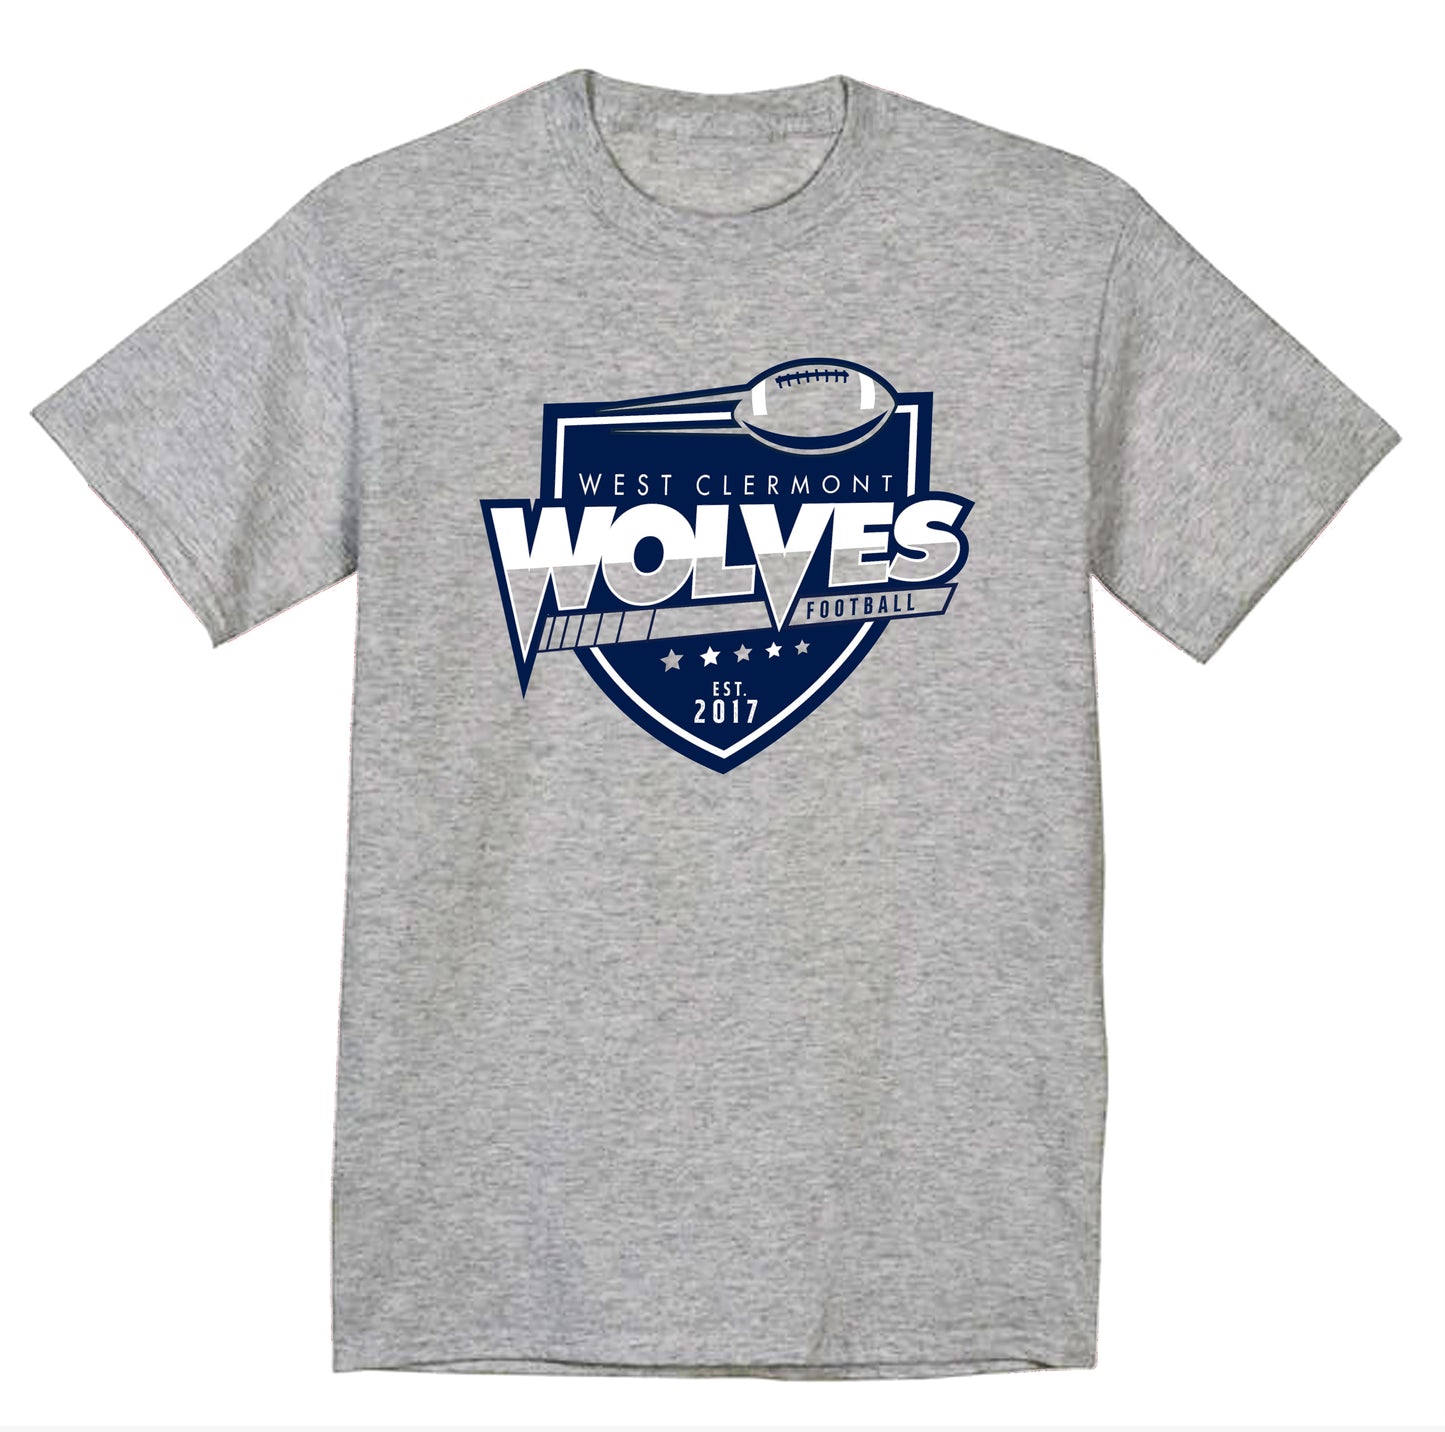 Wolves Football on GRAY